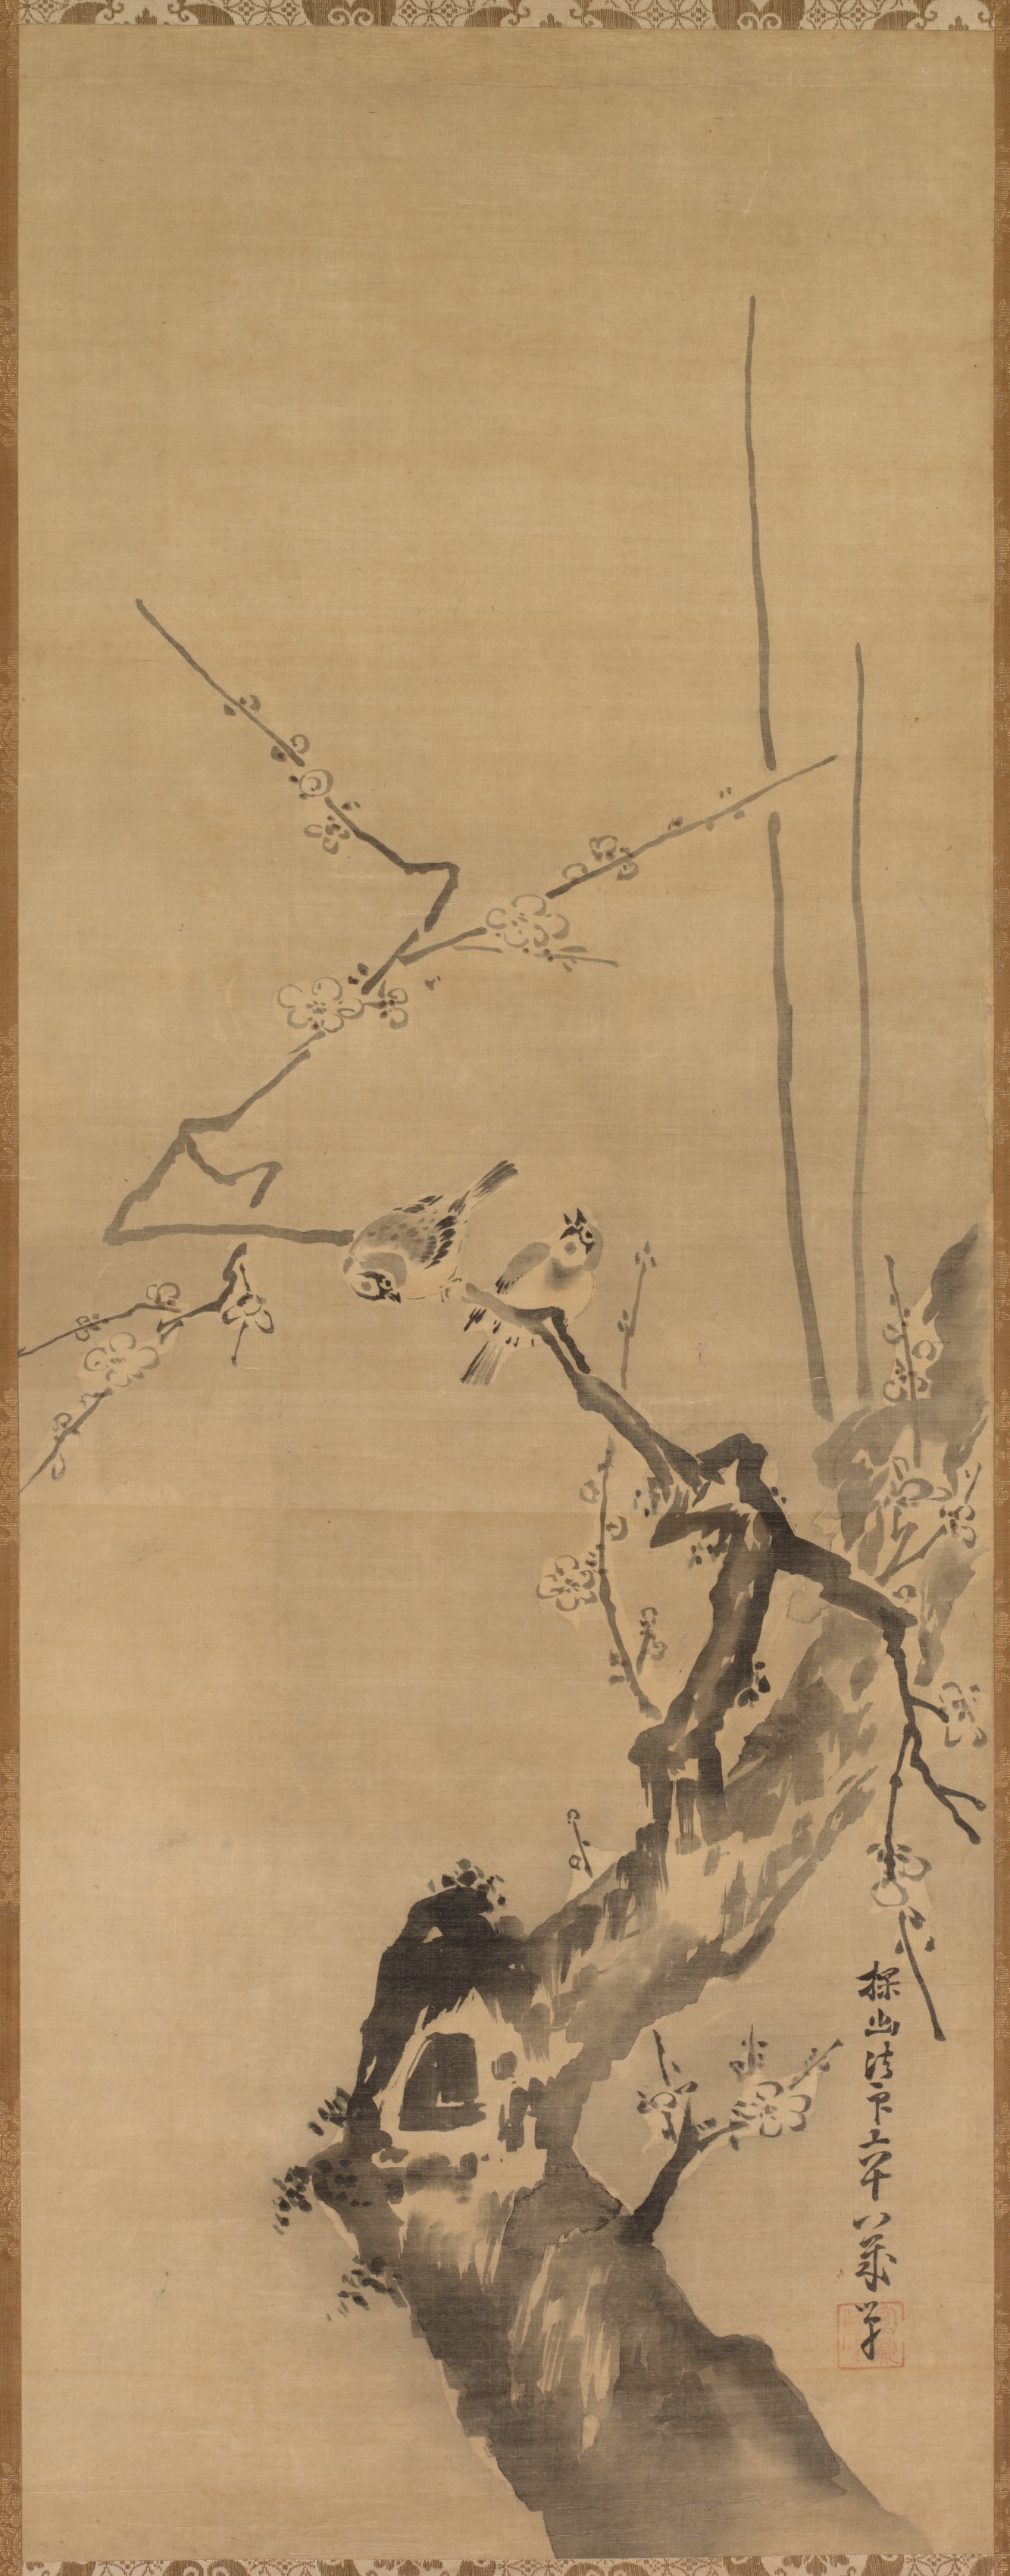 Sparrows on Blossoming Plum; A Sage with Tiger; Chinese Bird on Snow-Laden Branch